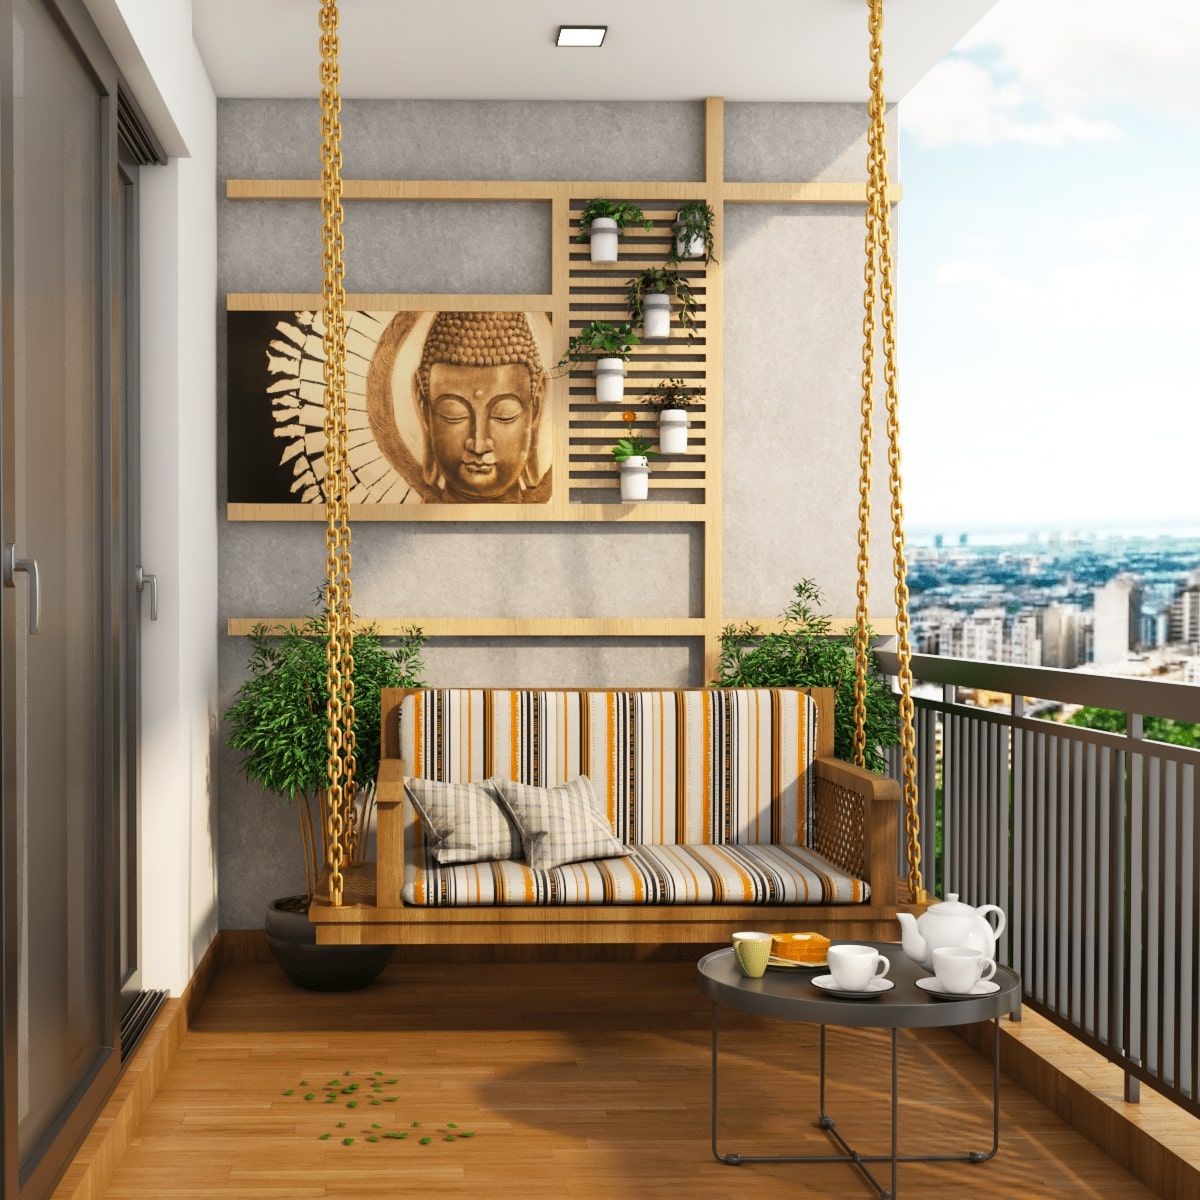 Spacious Balcony Design With A Grey Accent Wall | Livspace